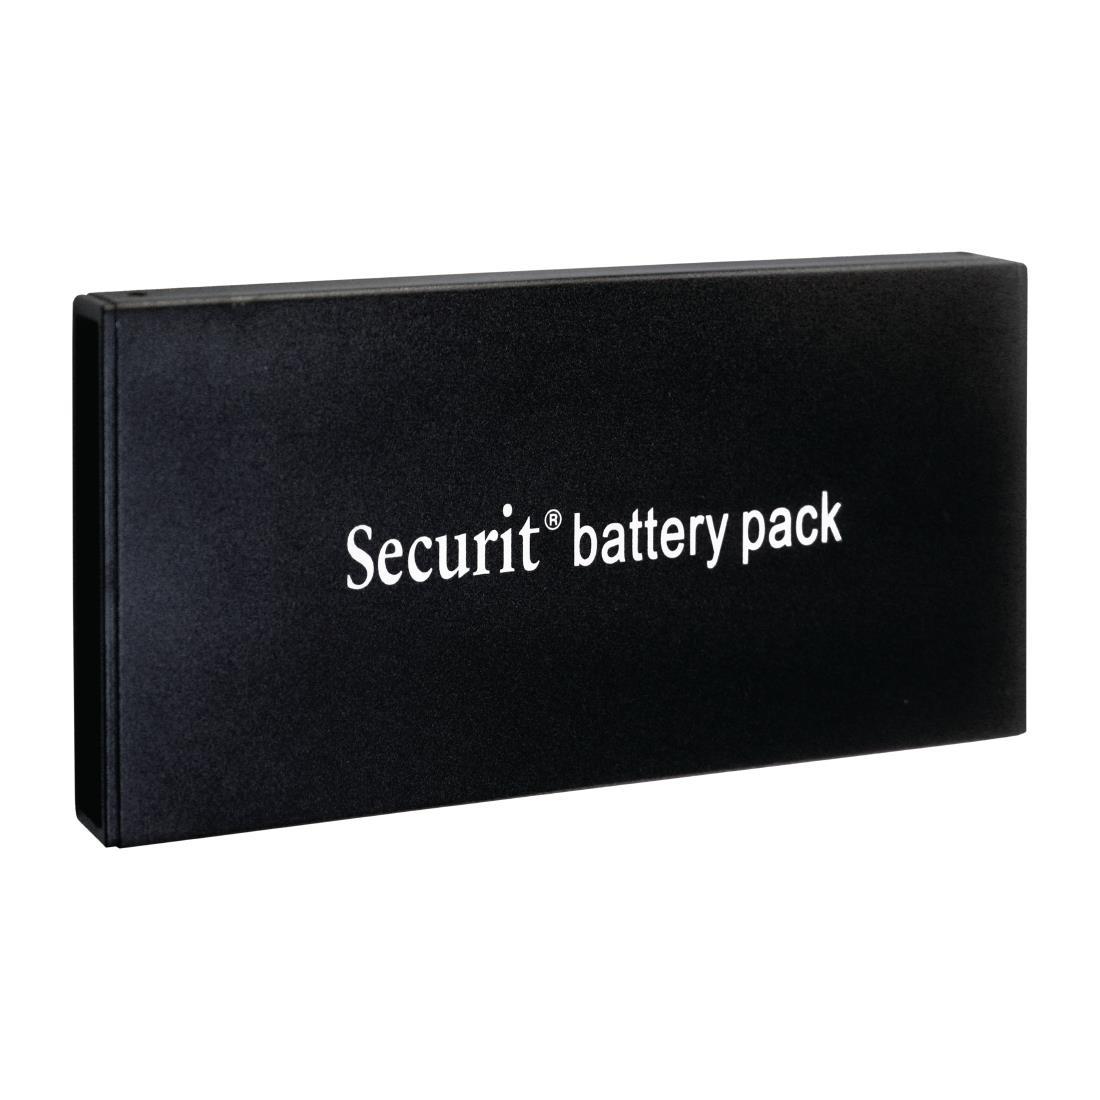 Rechargeable Lithium Ion Battery Pack - DL182  - 2